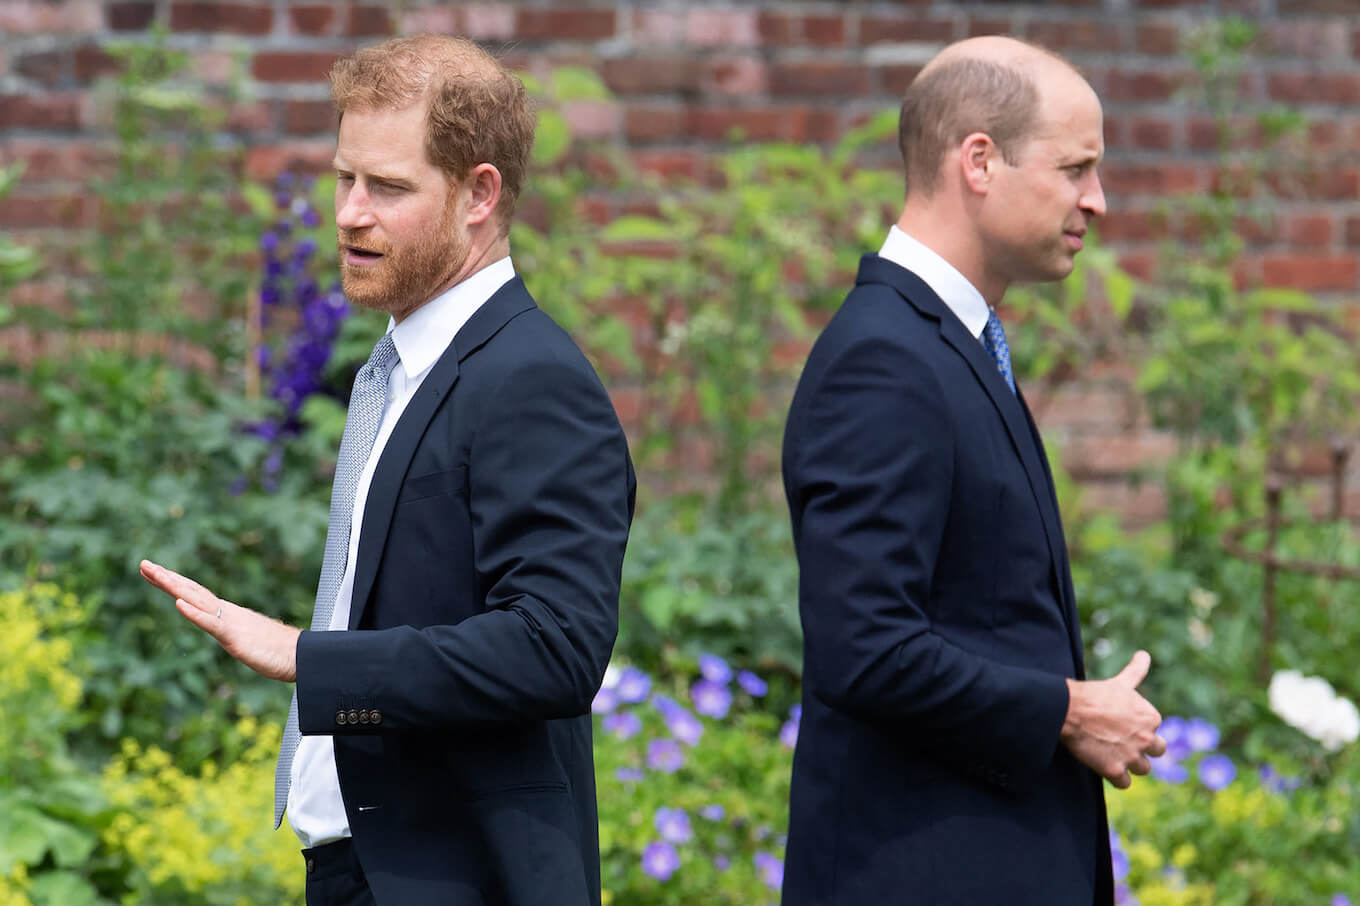 Prince Harry and Prince William in suits standing back to back outdoors